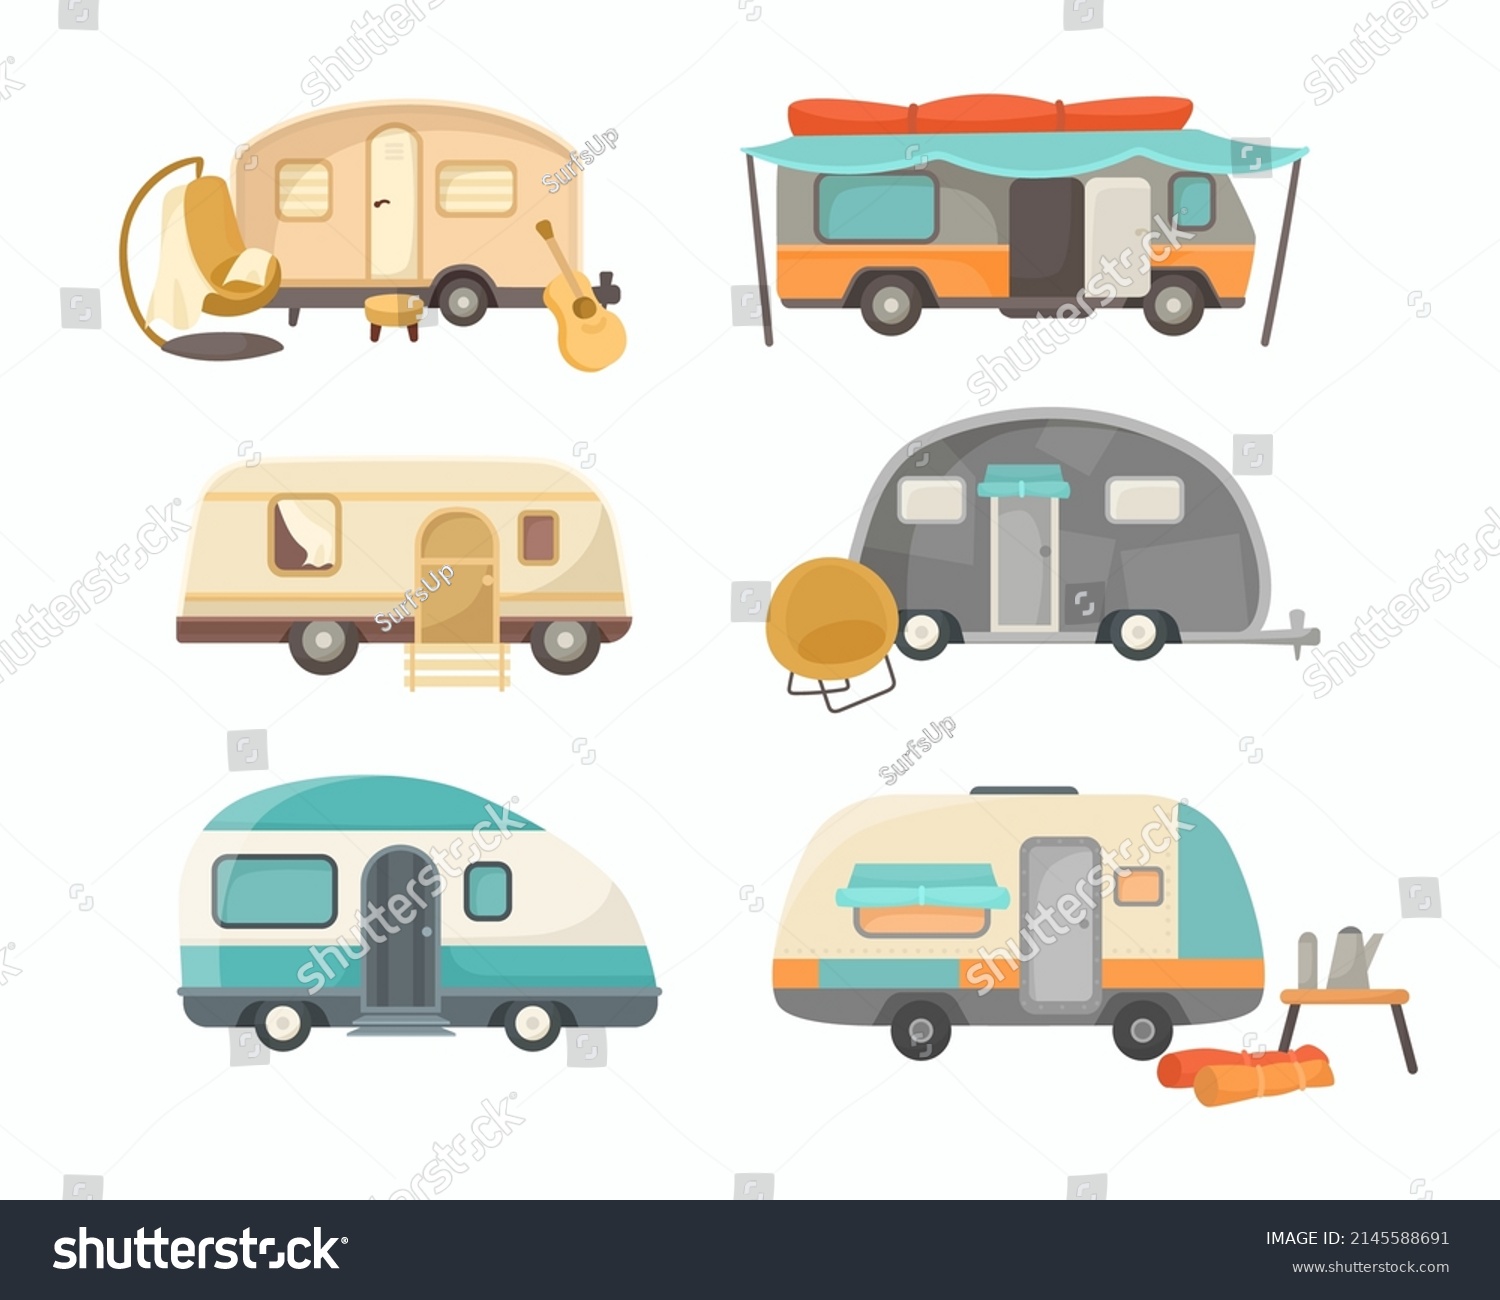 SVG of Various RV or house trailers cartoon illustration set. Vintage vans, mobile home or camping truck for travel, adventure, journey in summer family vacation. Campsite, camp, transportation concept svg